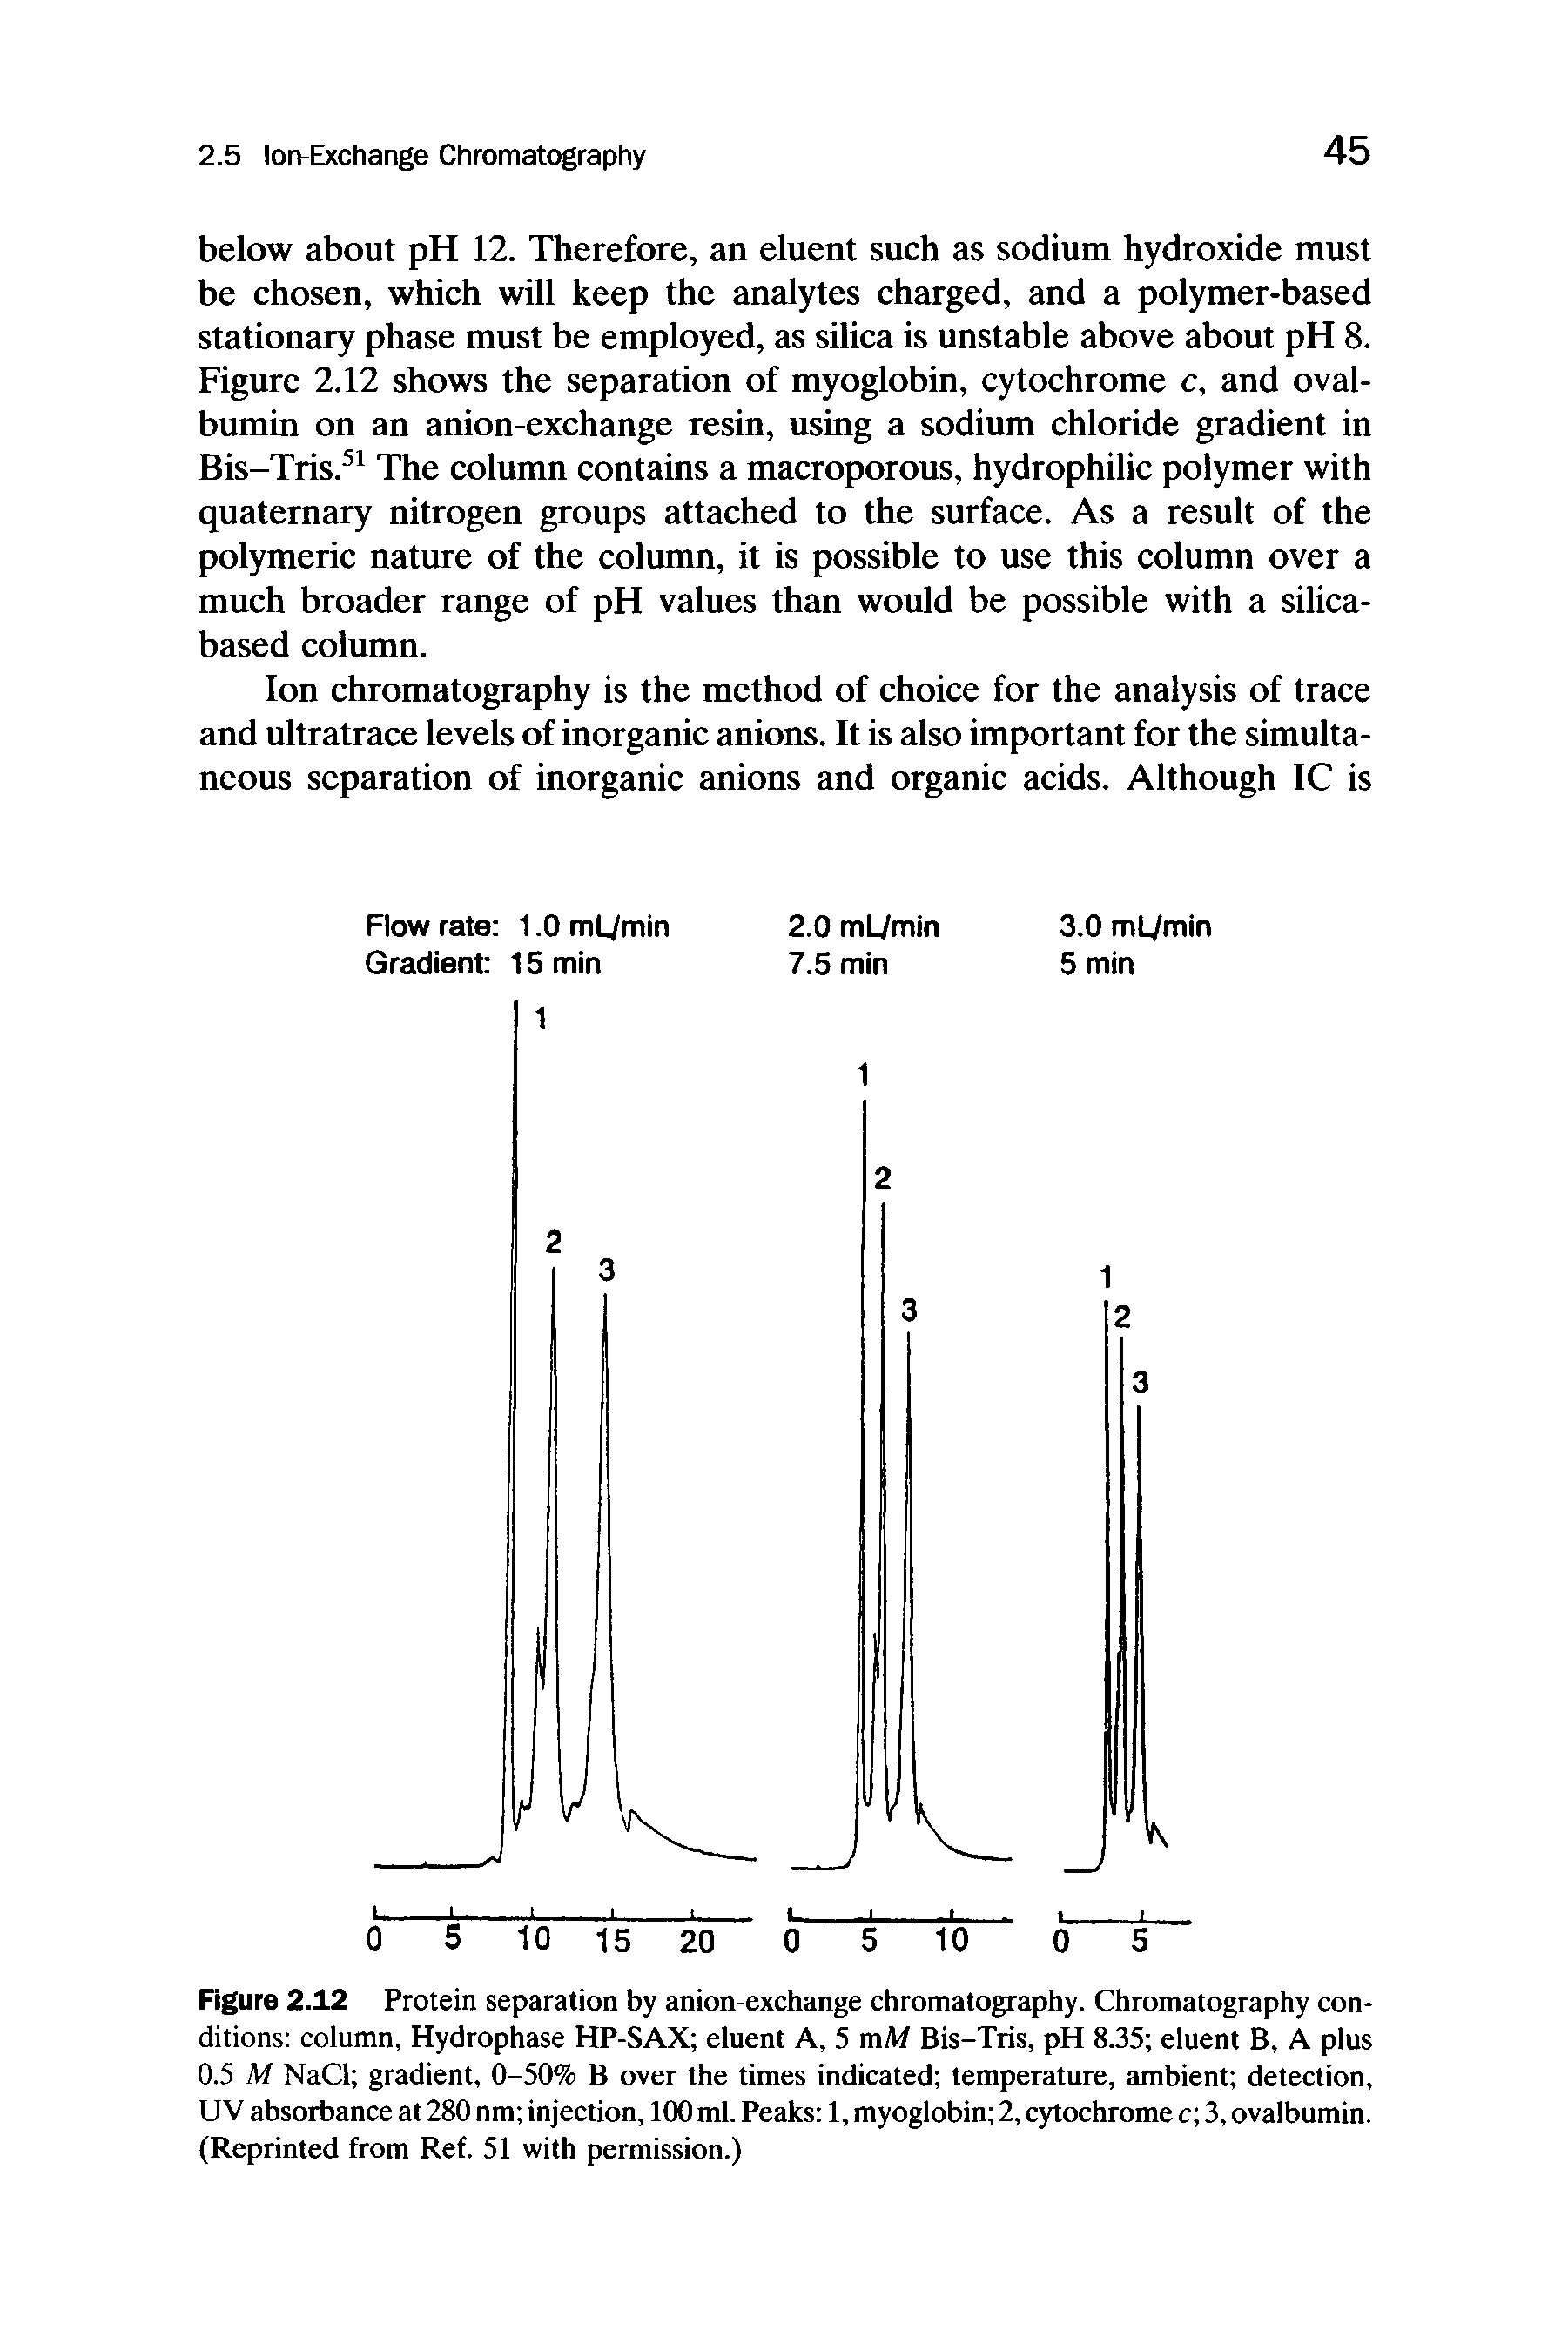 Figure 2.12 Protein separation by anion-exchange chromatography. Chromatography conditions column, Hydrophase HP-SAX eluent A, 5 mM Bis-Tris, pH 8.35 eluent B, A plus 0.5 M NaCl gradient, 0-50% B over the times indicated temperature, ambient detection, UV absorbance at 280 nm injection, 100 ml. Peaks 1, myoglobin 2, cytochrome c 3, ovalbumin. (Reprinted from Ref. 51 with permission.)...